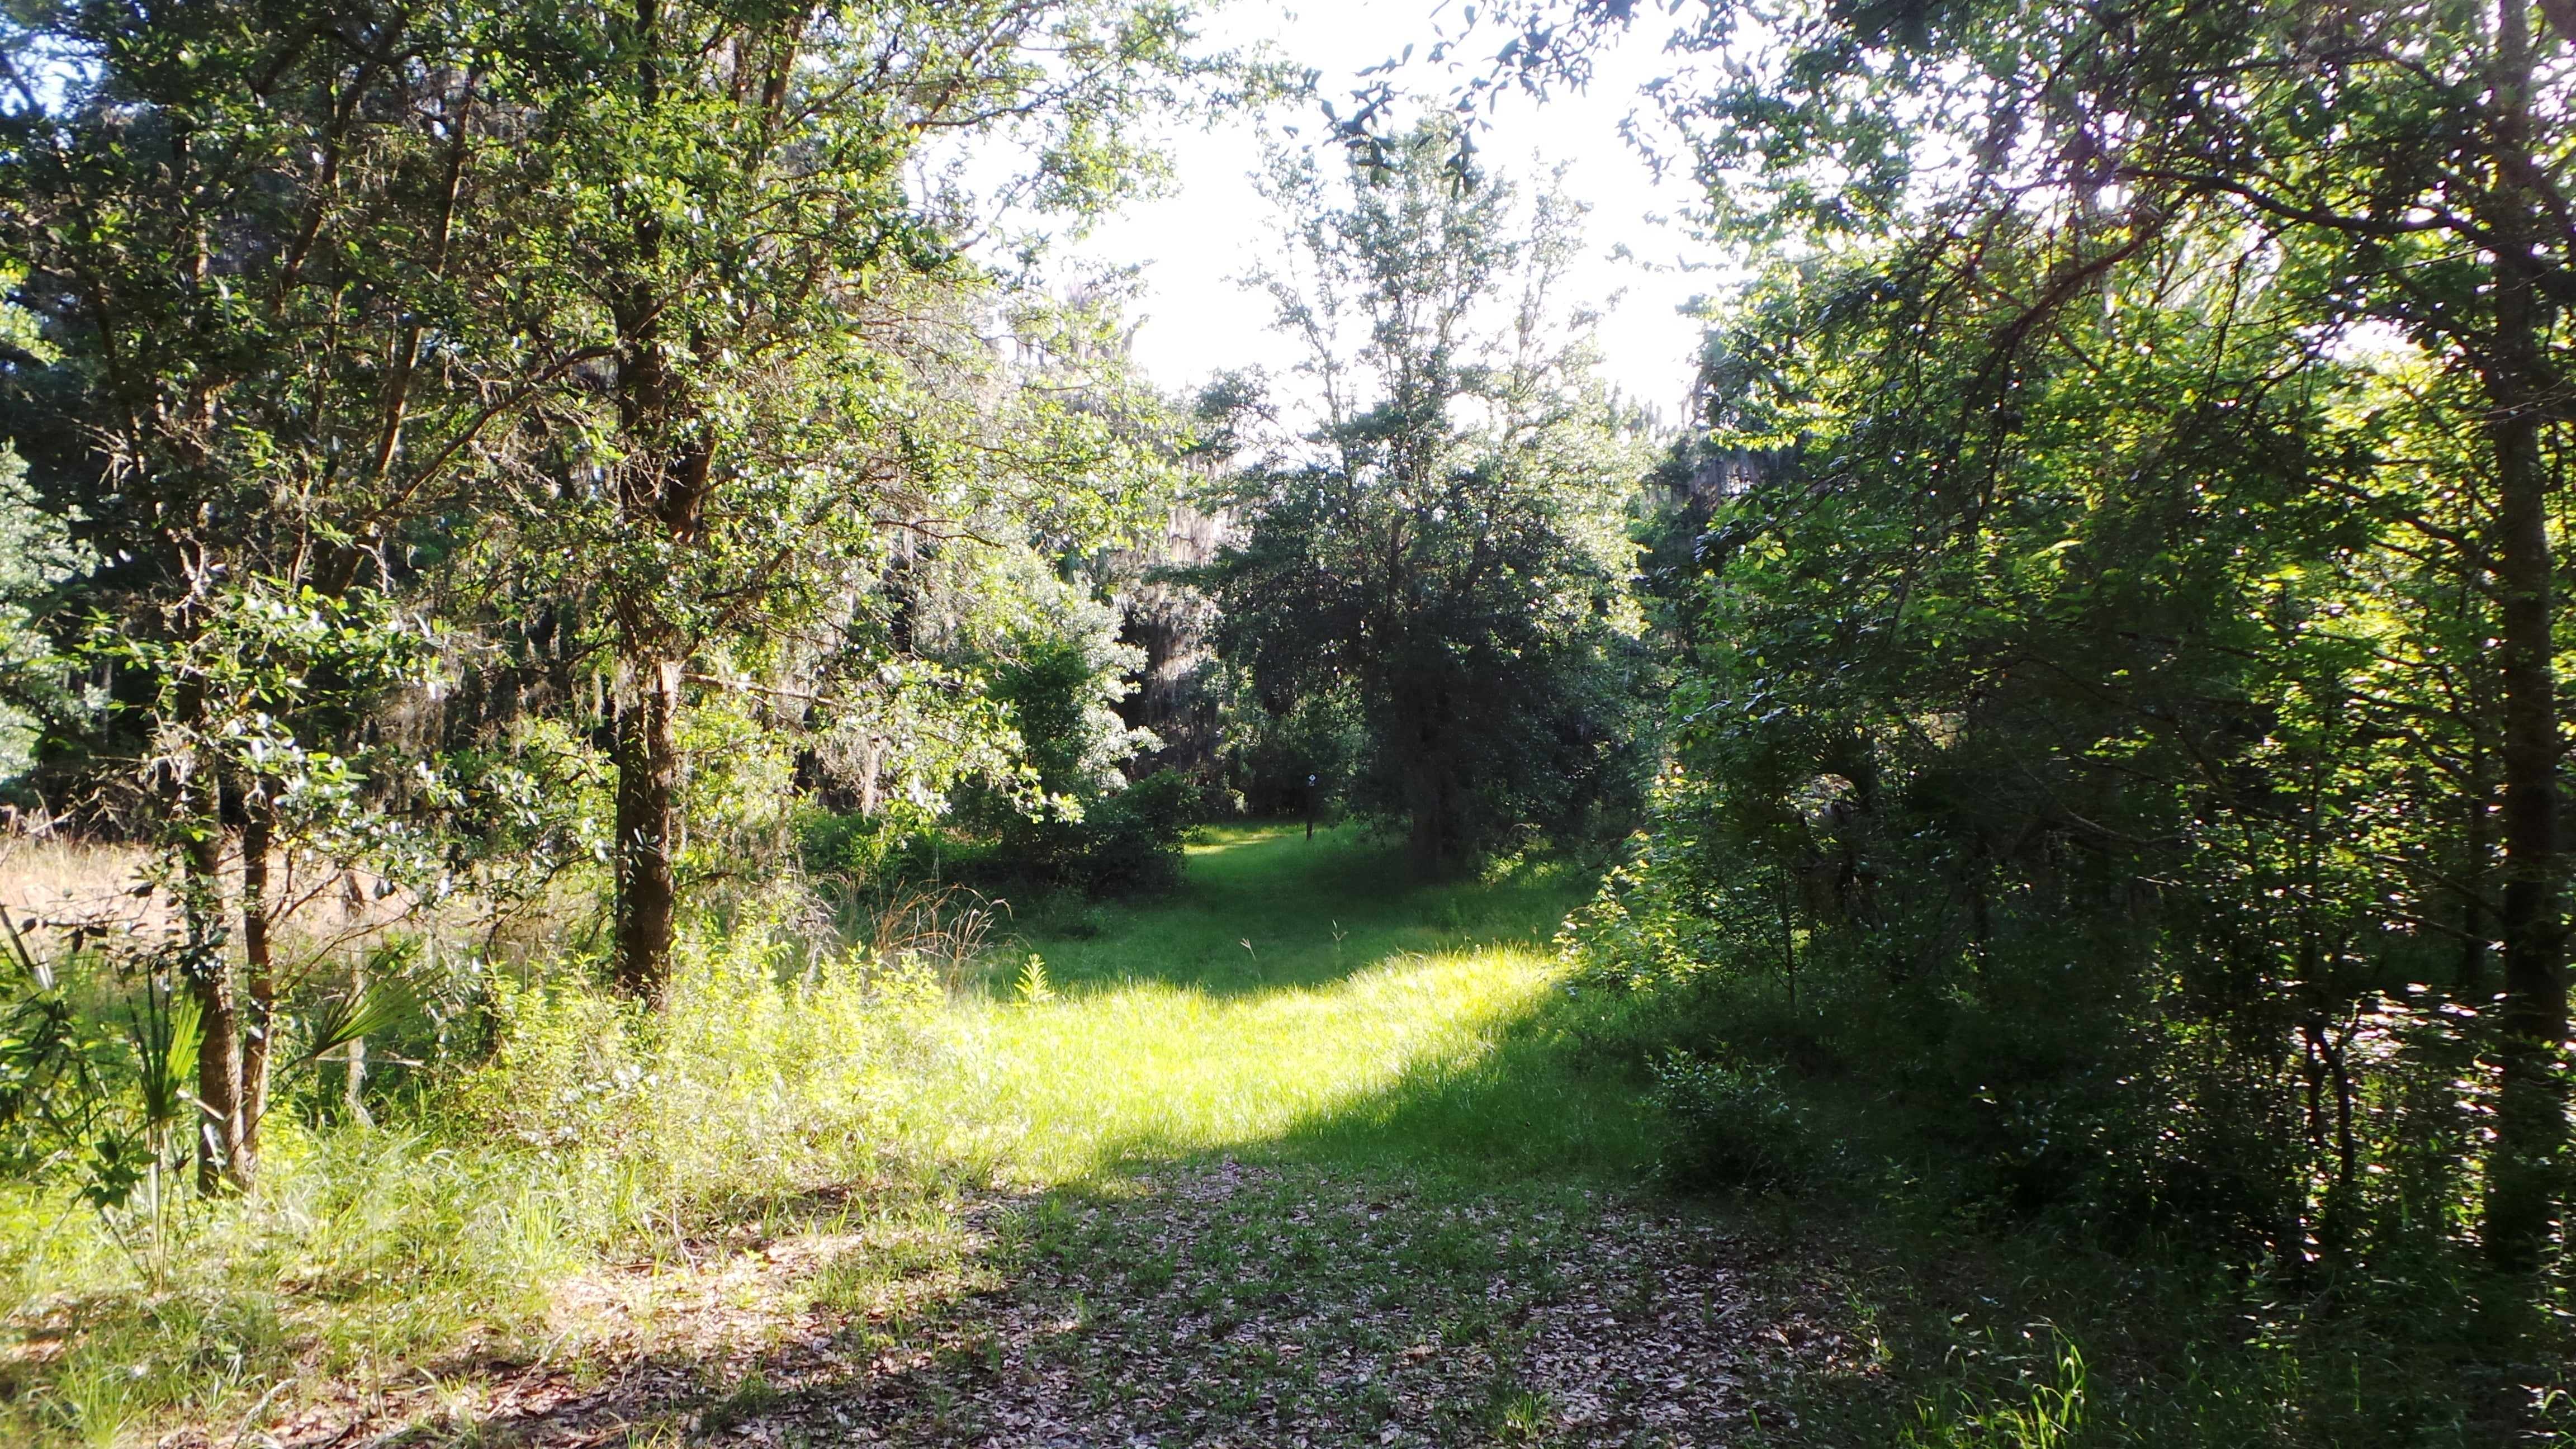 2nd trail goes through meadow and woods